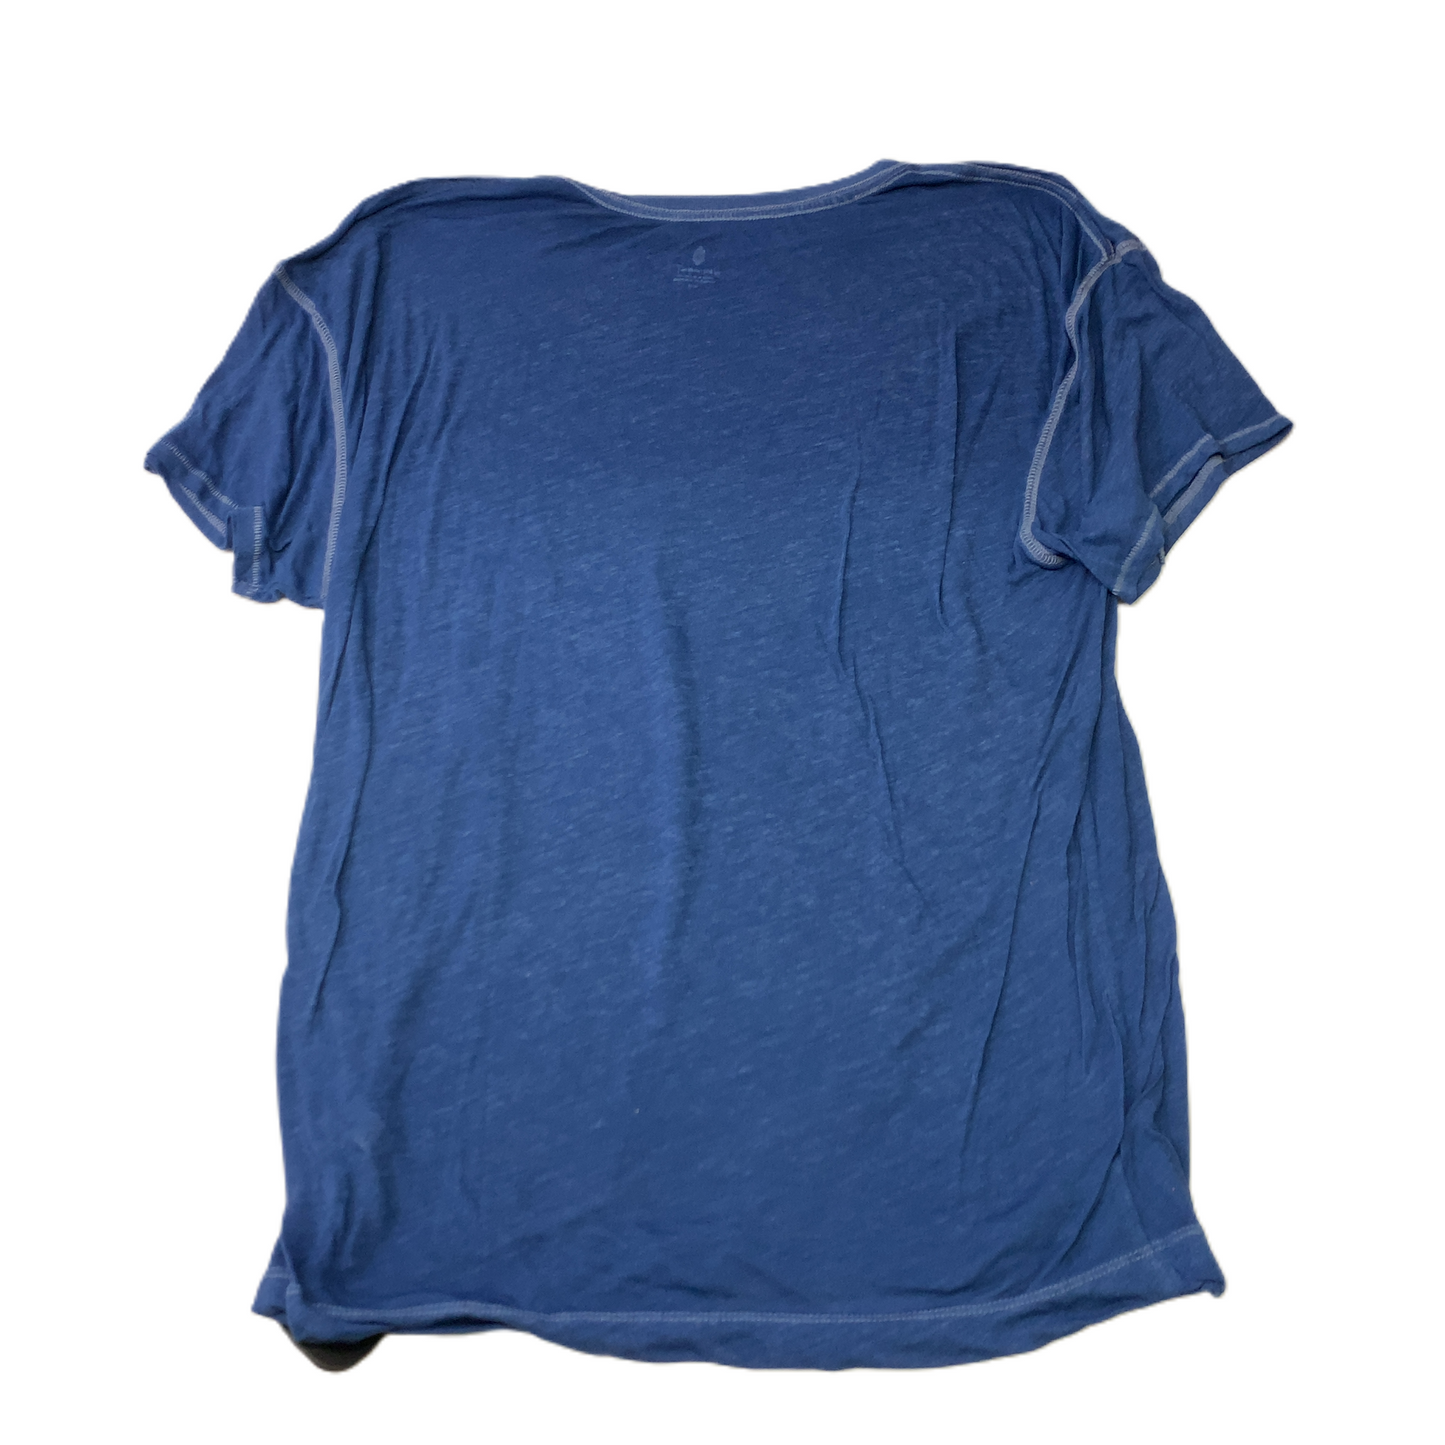 Blue  Athletic Top Short Sleeve By Free People  Size: M